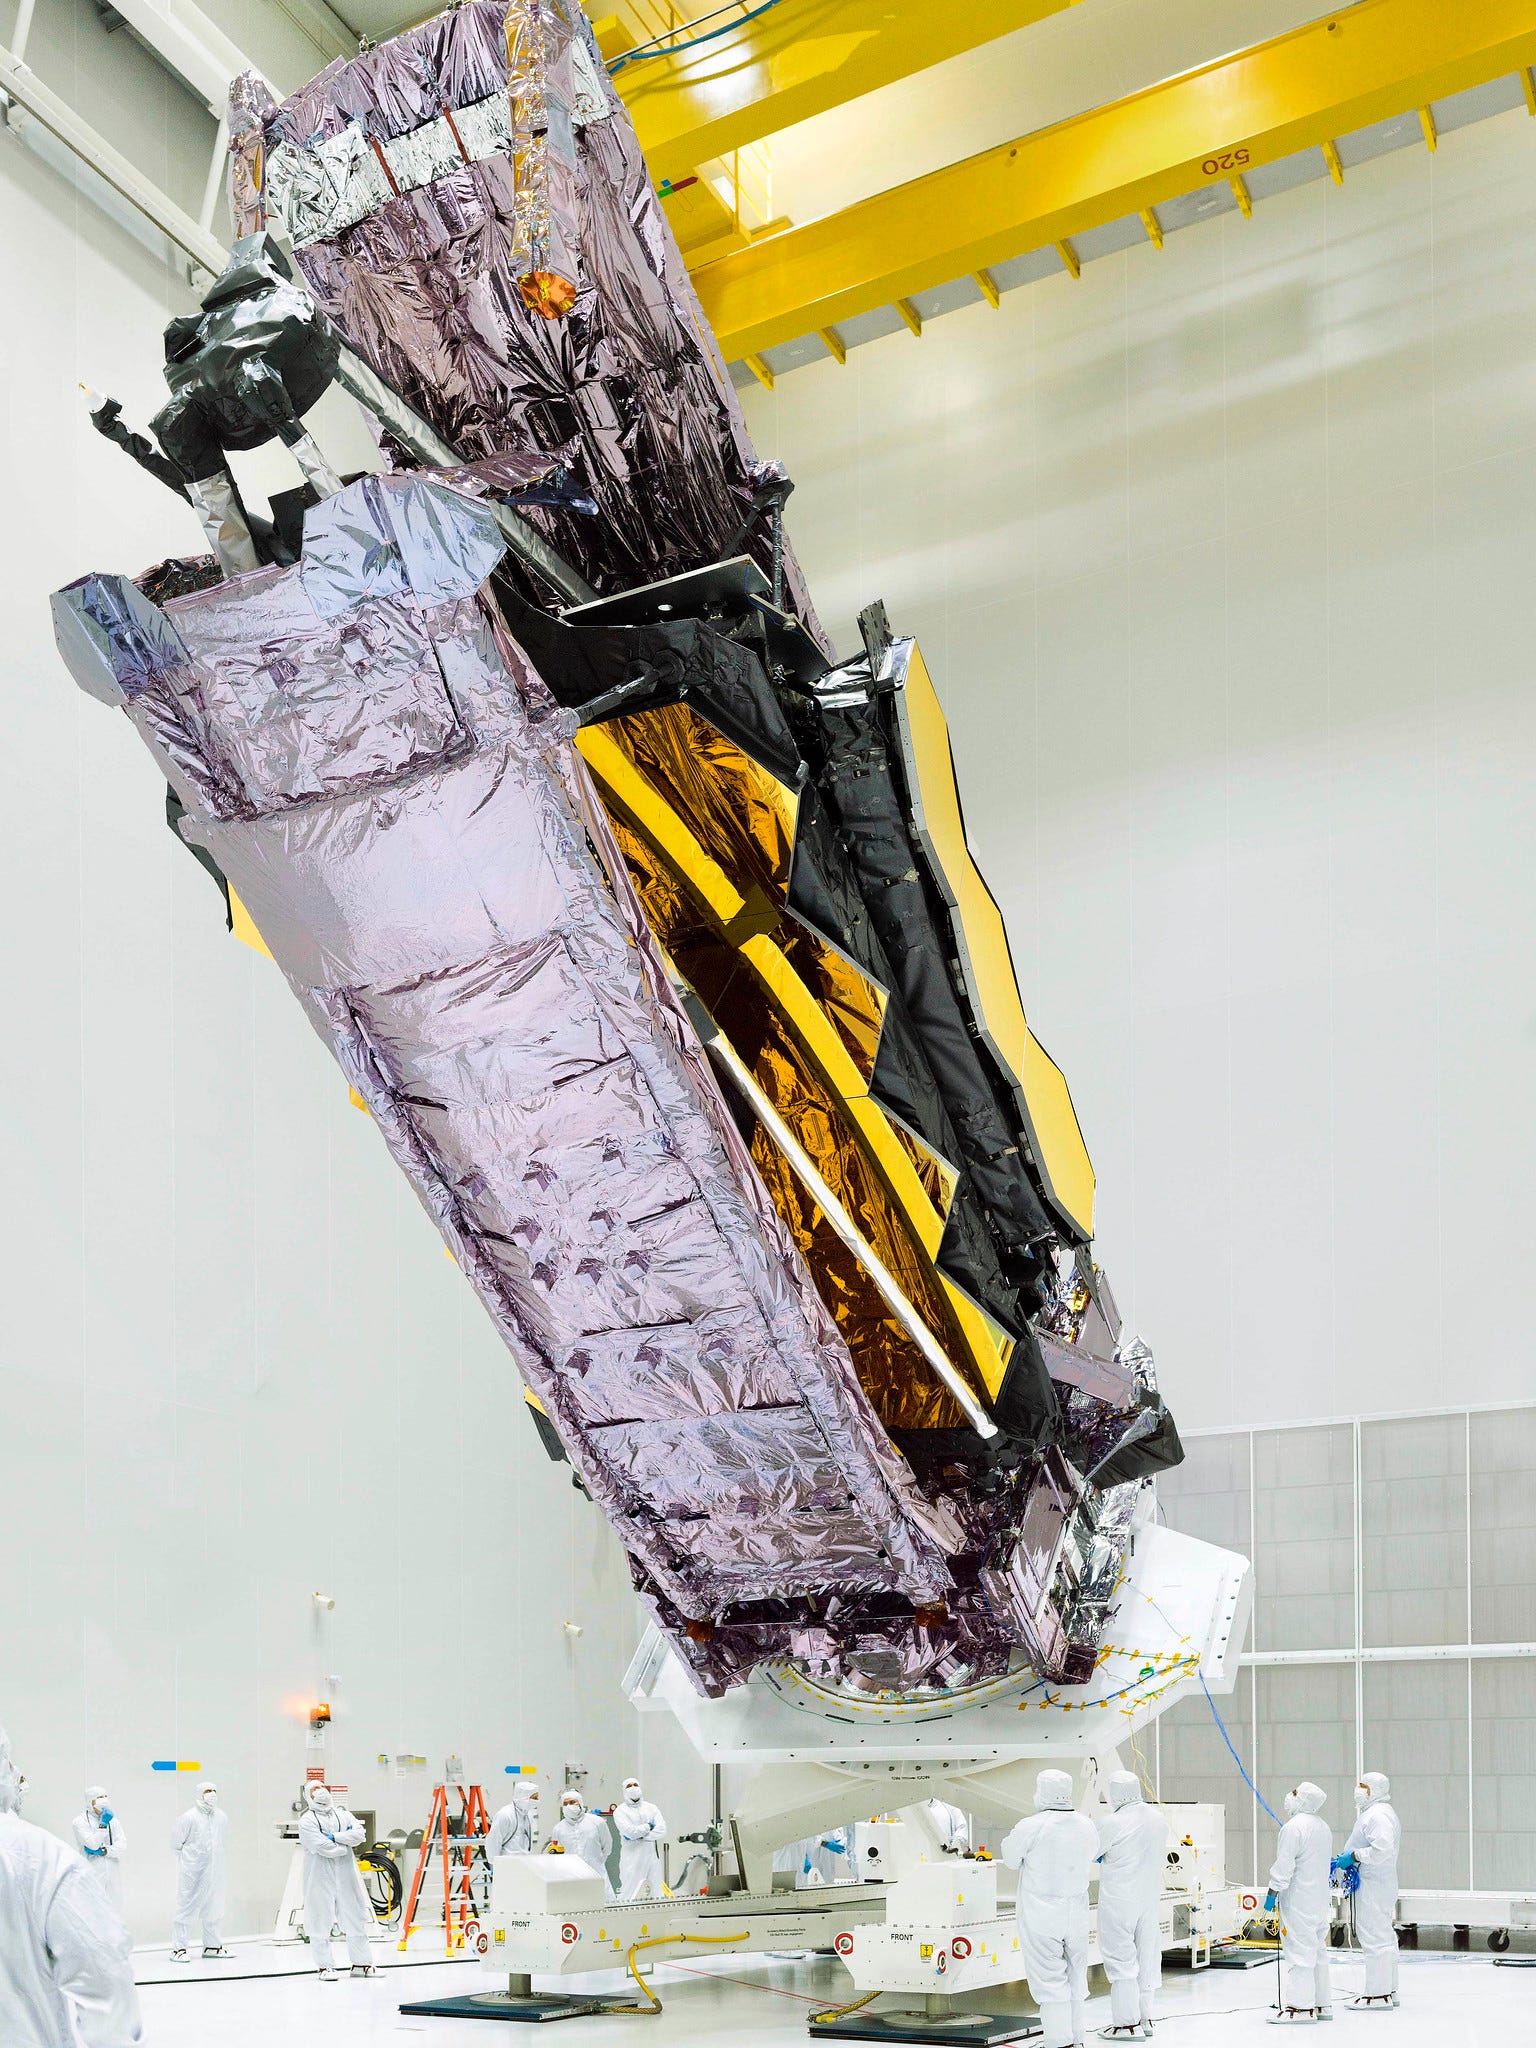 james webb space telescope lifted vertically enormous gold mirrors wrapped in purple foil inside white cleanroom